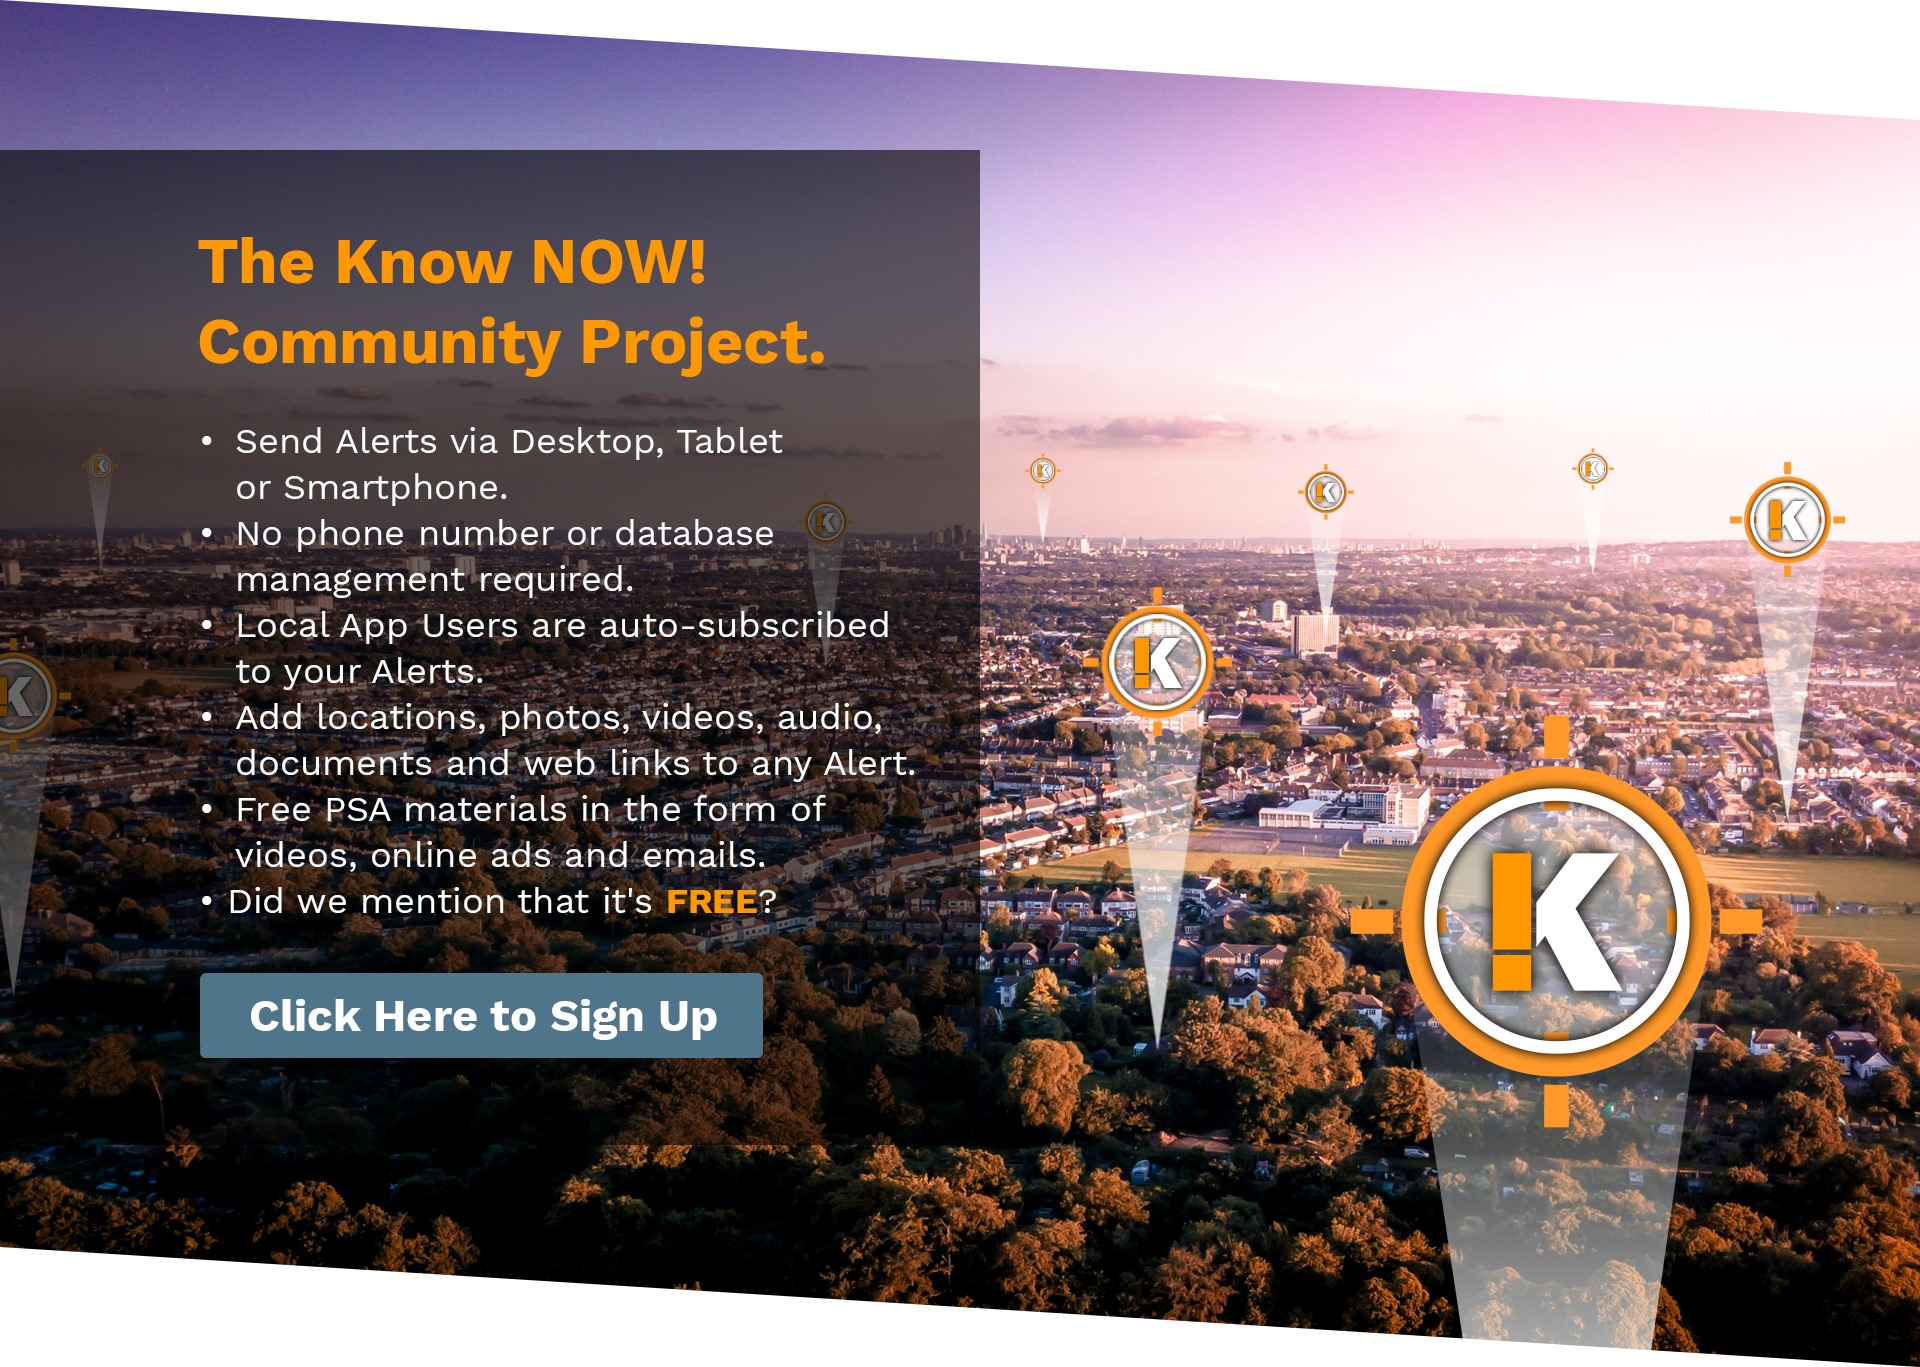 Know NOW! Community Project